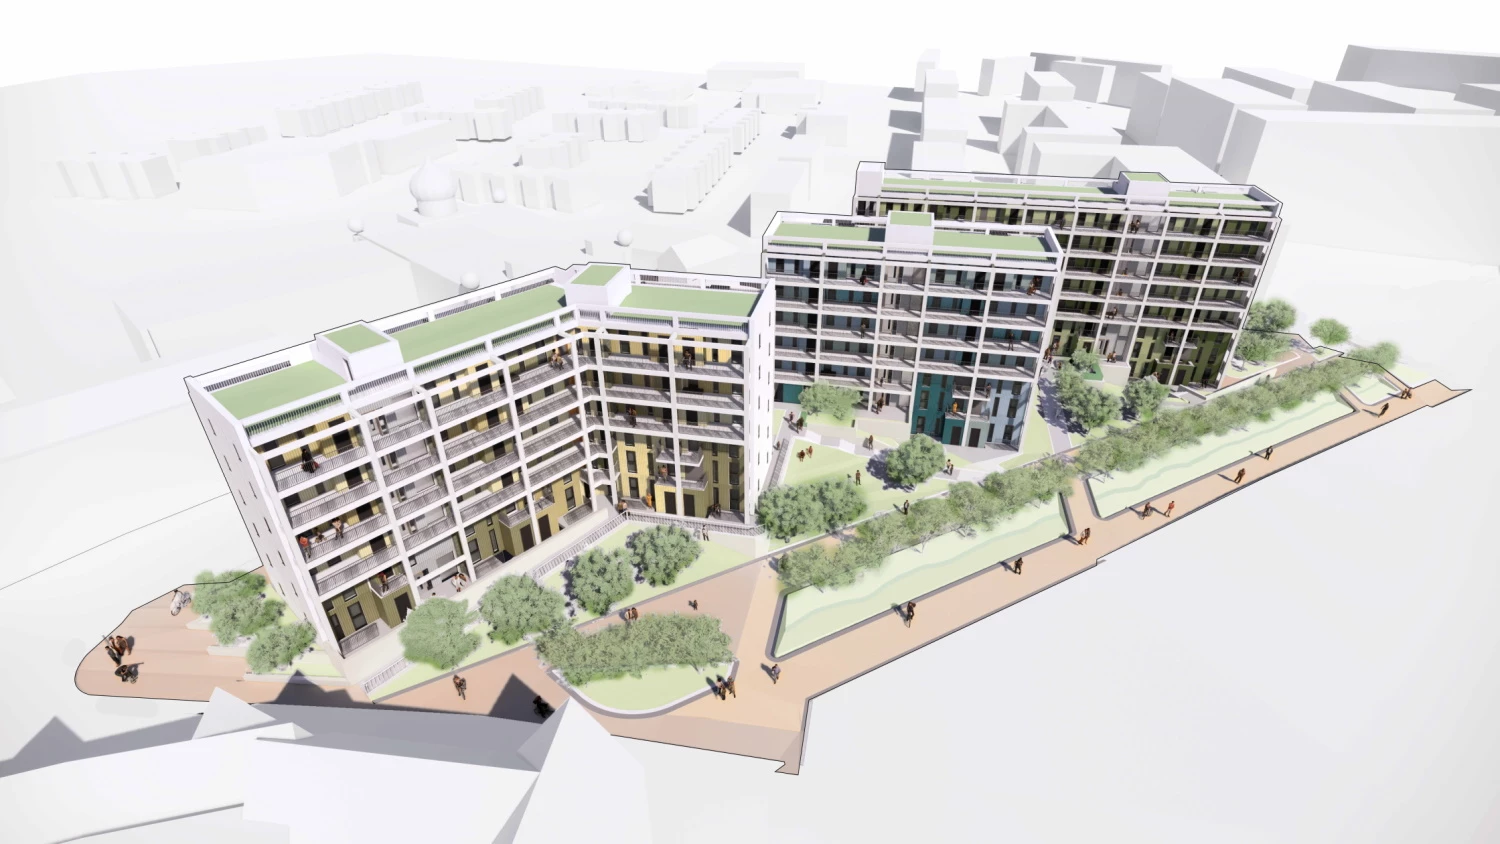 How the Future Homes development could look if approved.